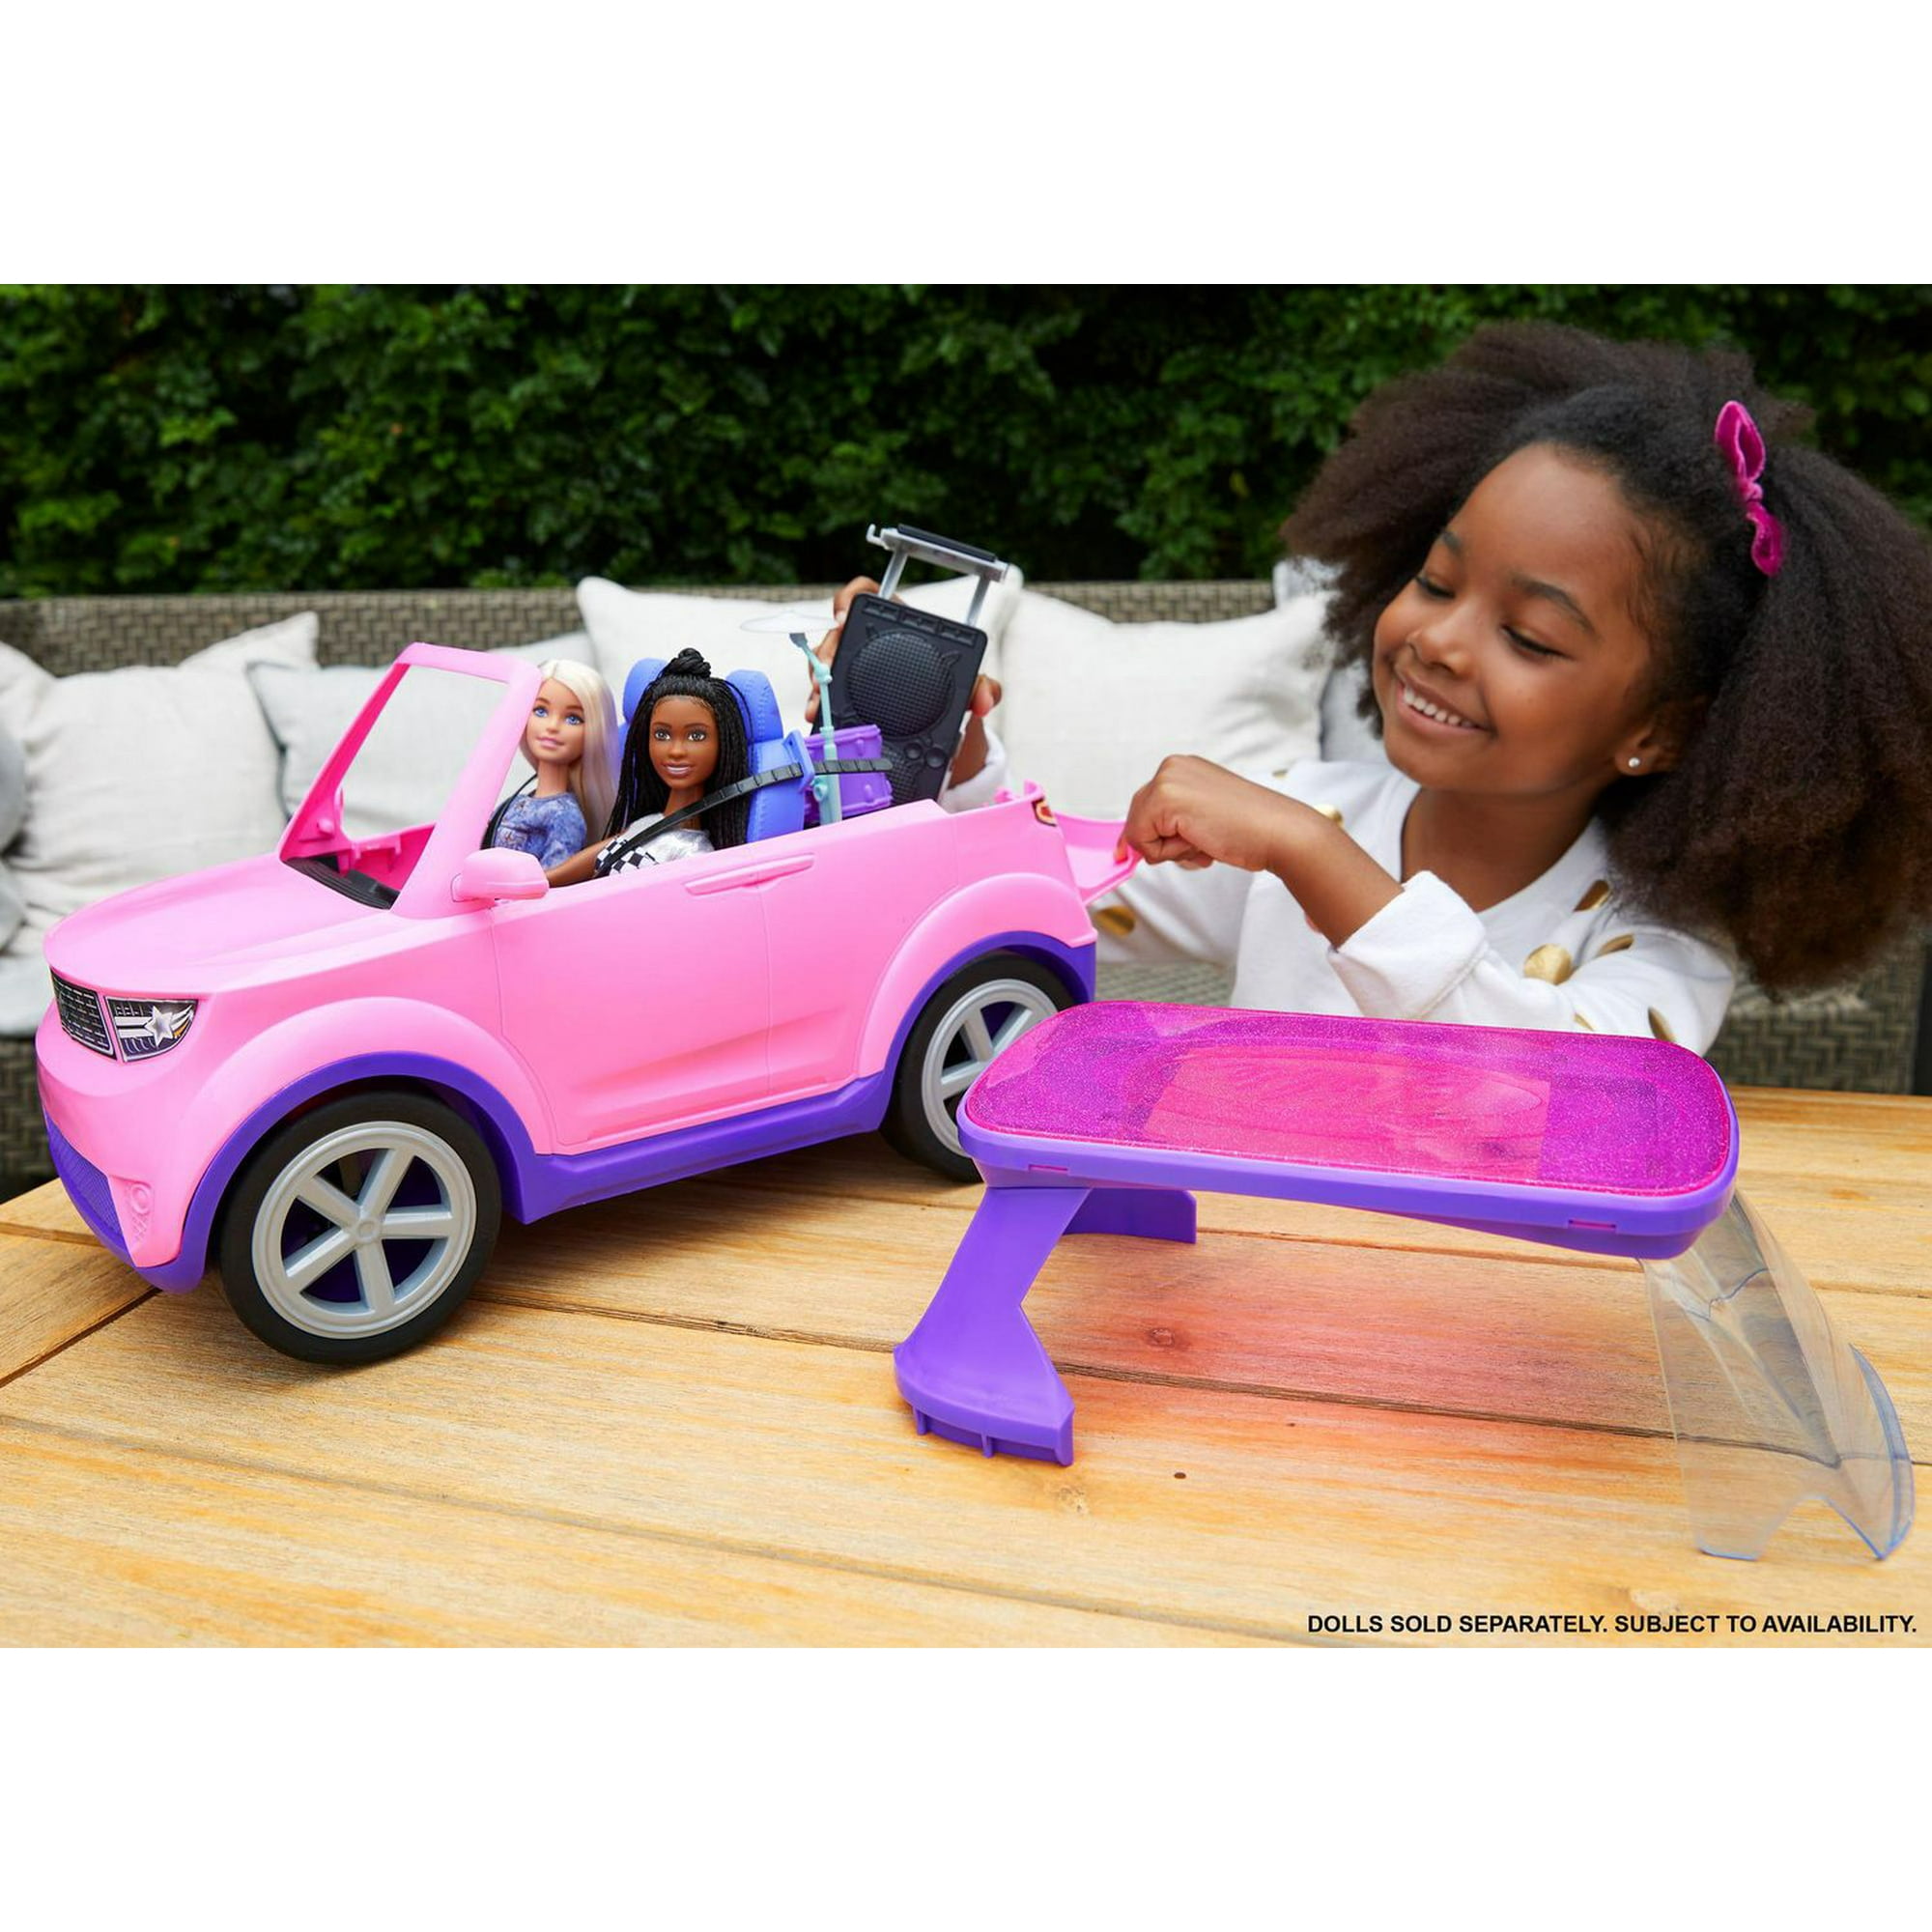 Barbie  Love. Marriage. Baby carriage. Overflowing with